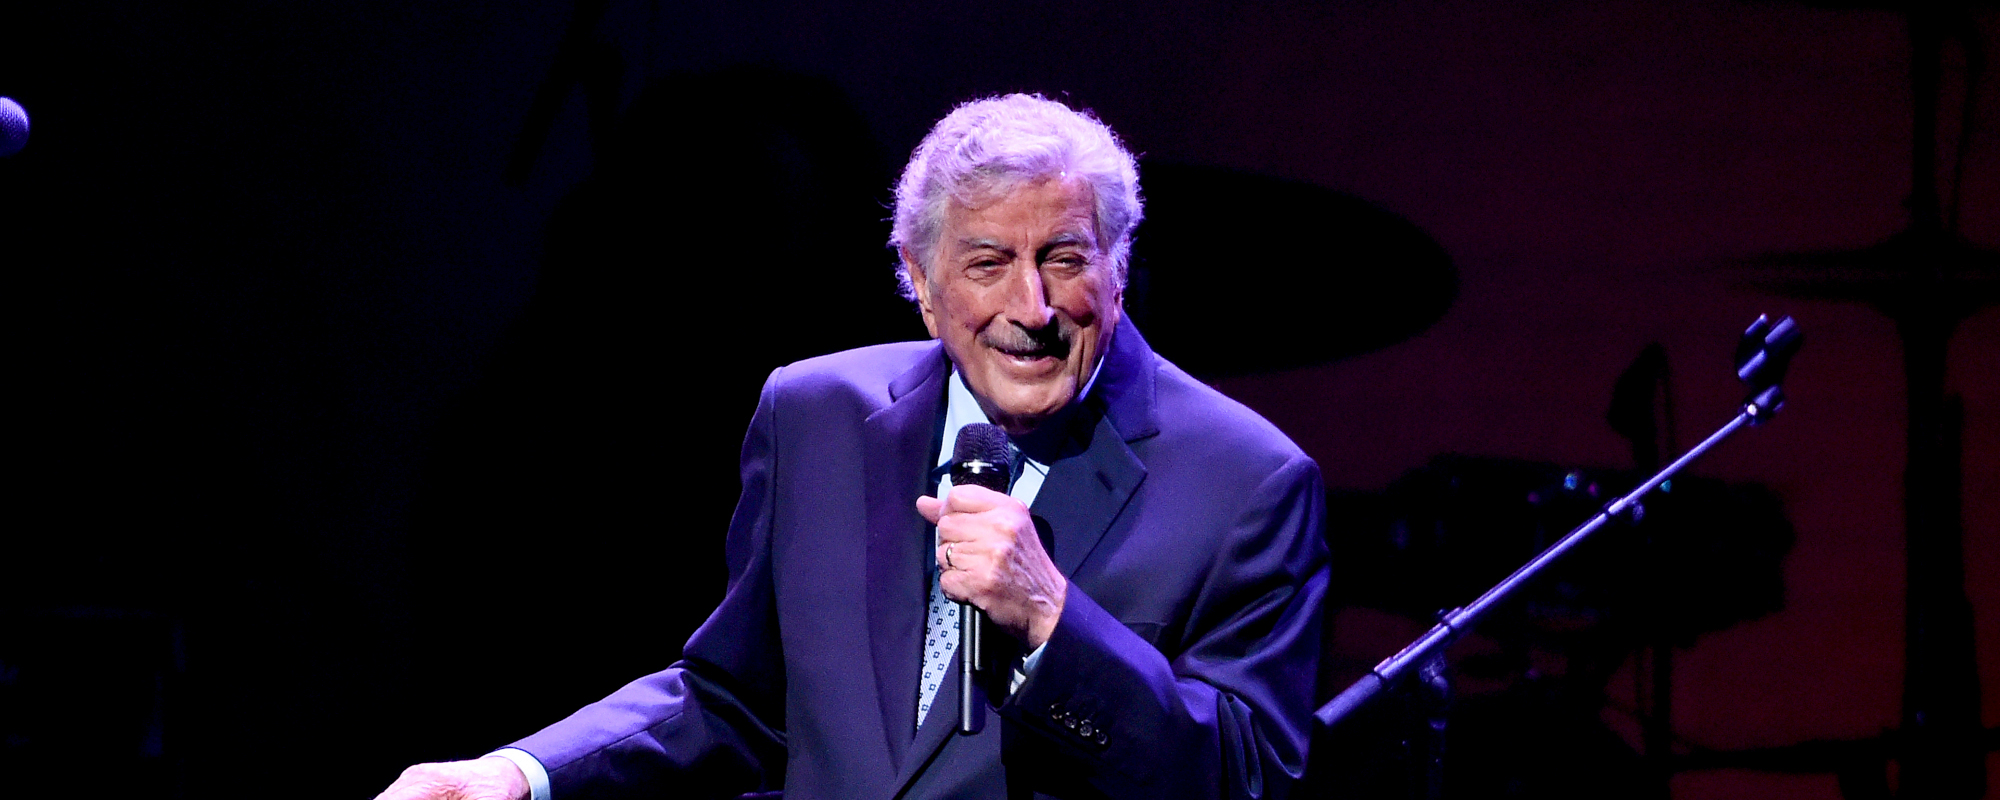 5 Things to Know About Tony Bennett